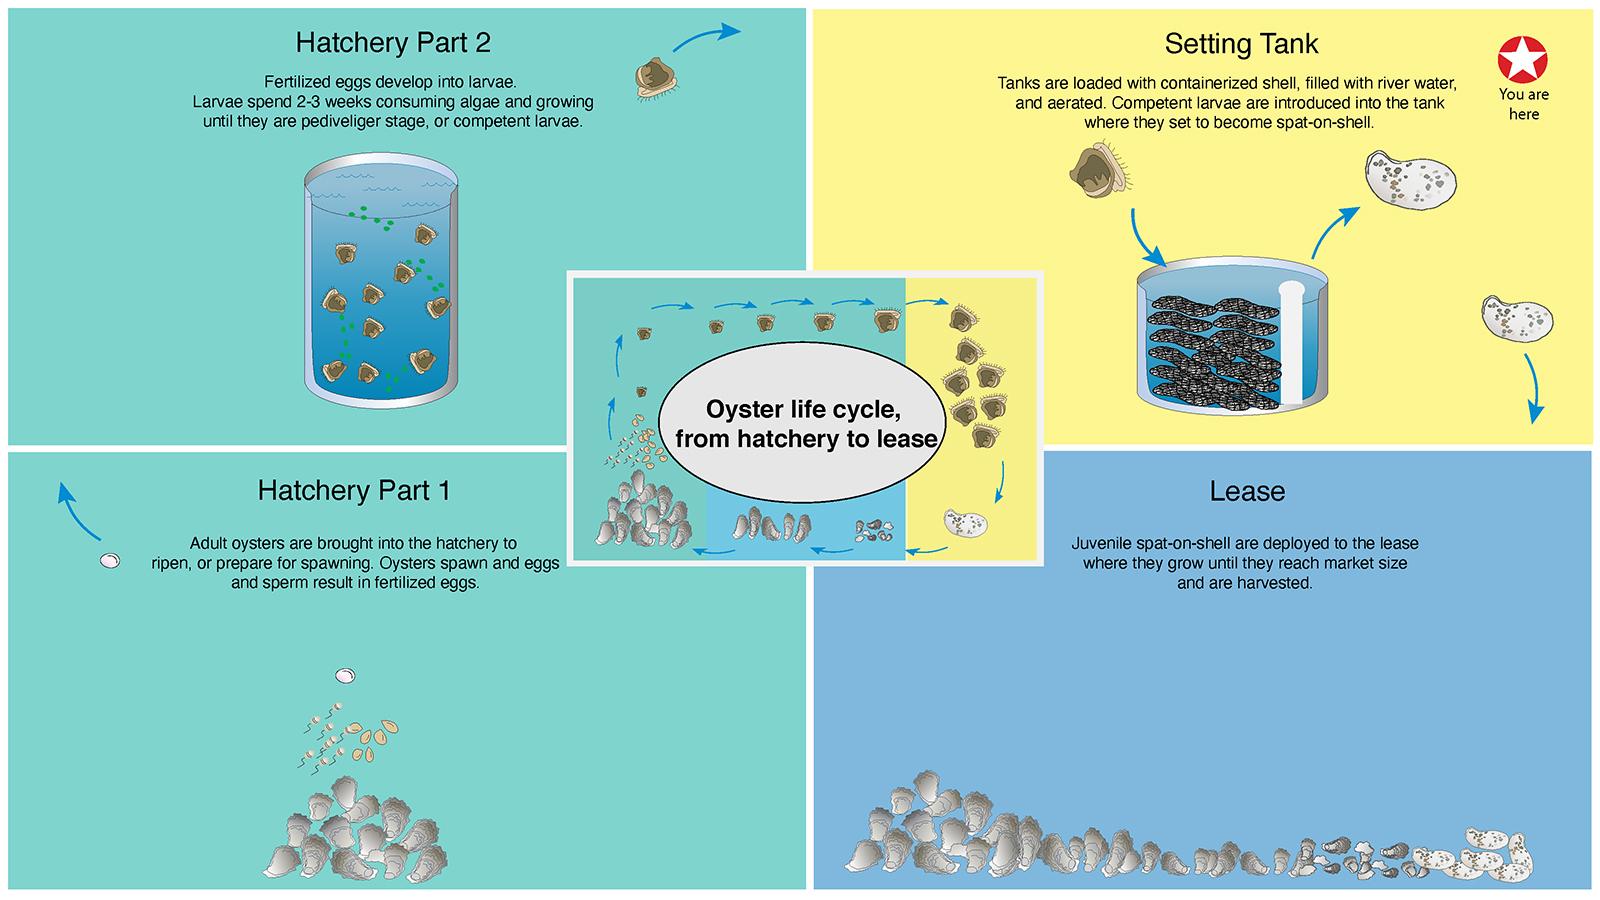 Graphic depicting the life cycle of an oyster from hatchery to lease